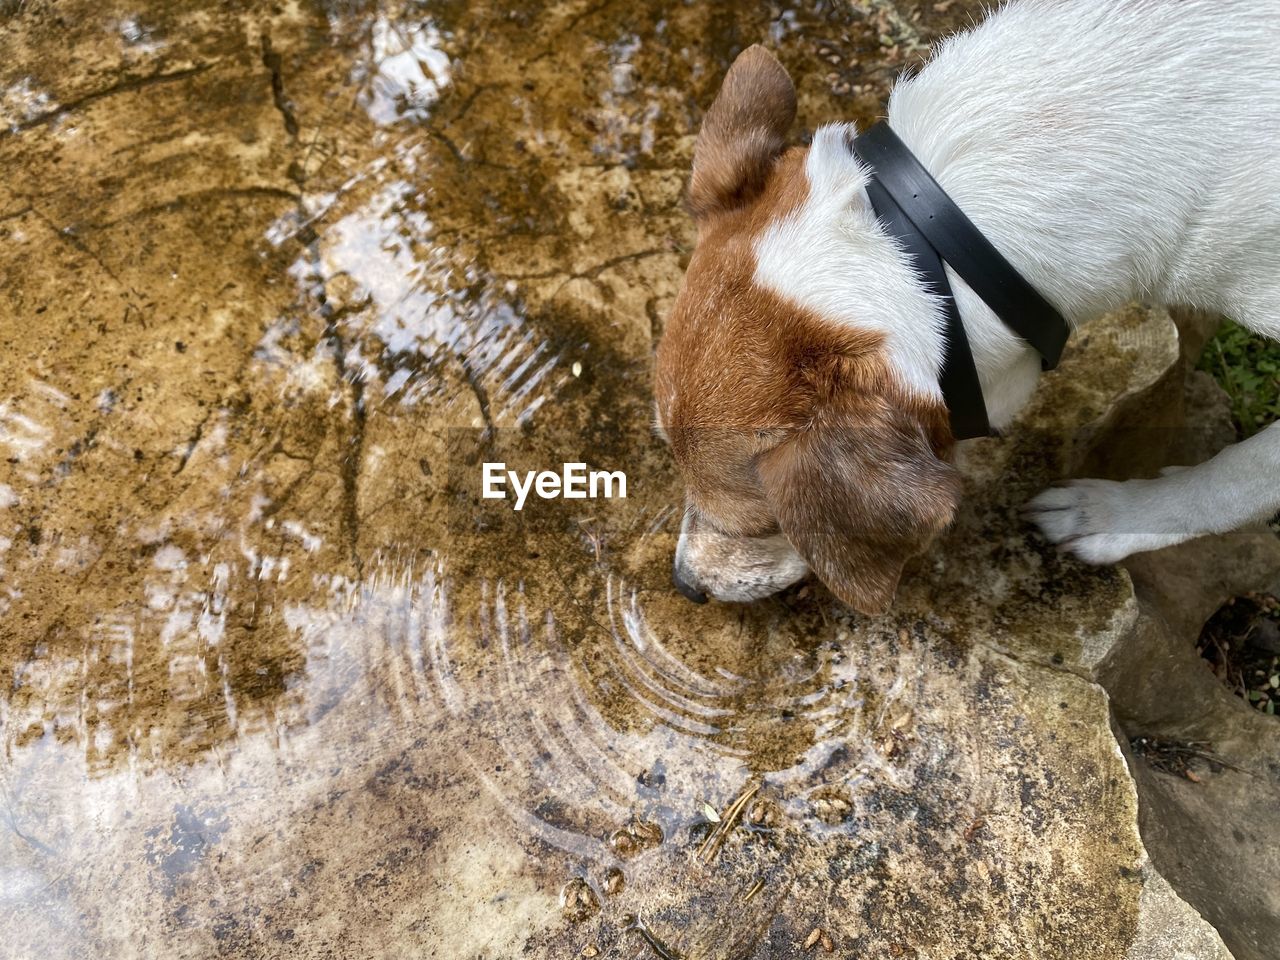 Close-up of dog drinking water from a stump